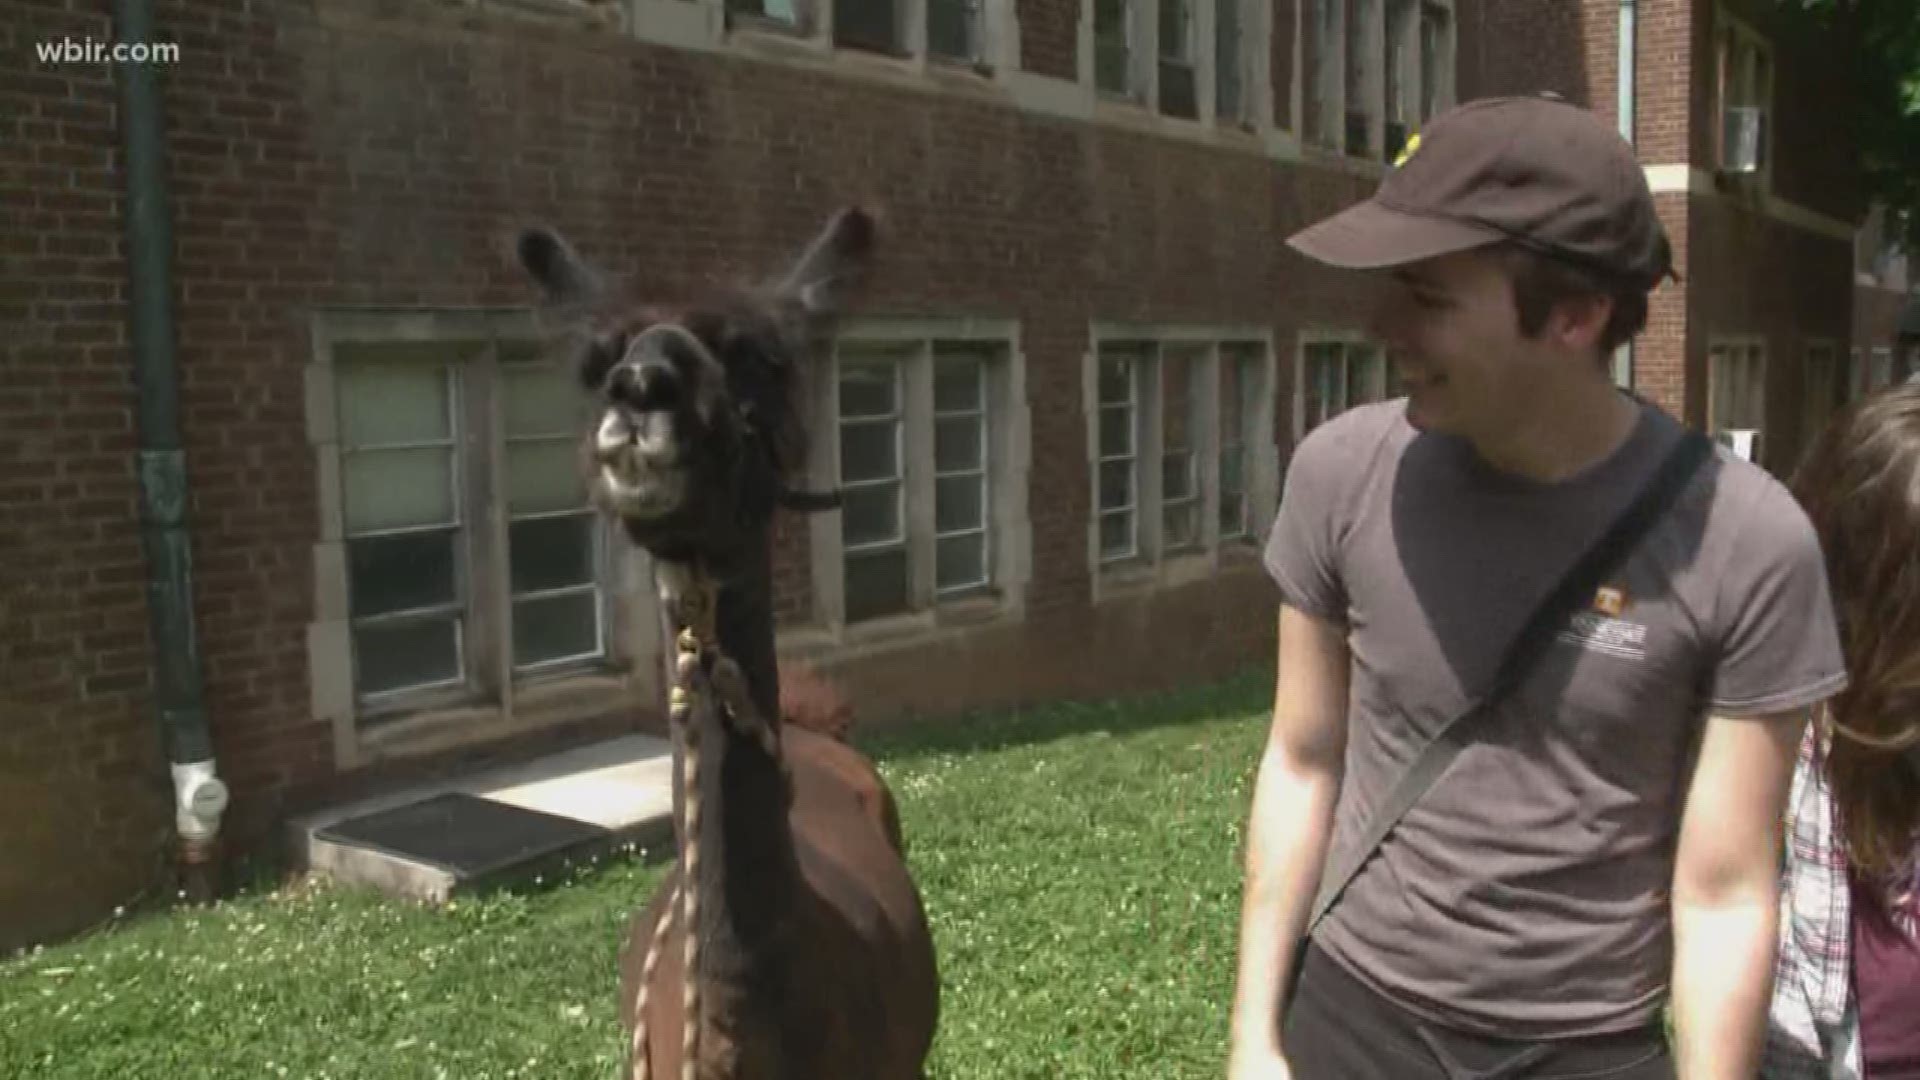 Ahead of exams -- the university is trying to make studying less stressful for students by bringing in llamas.